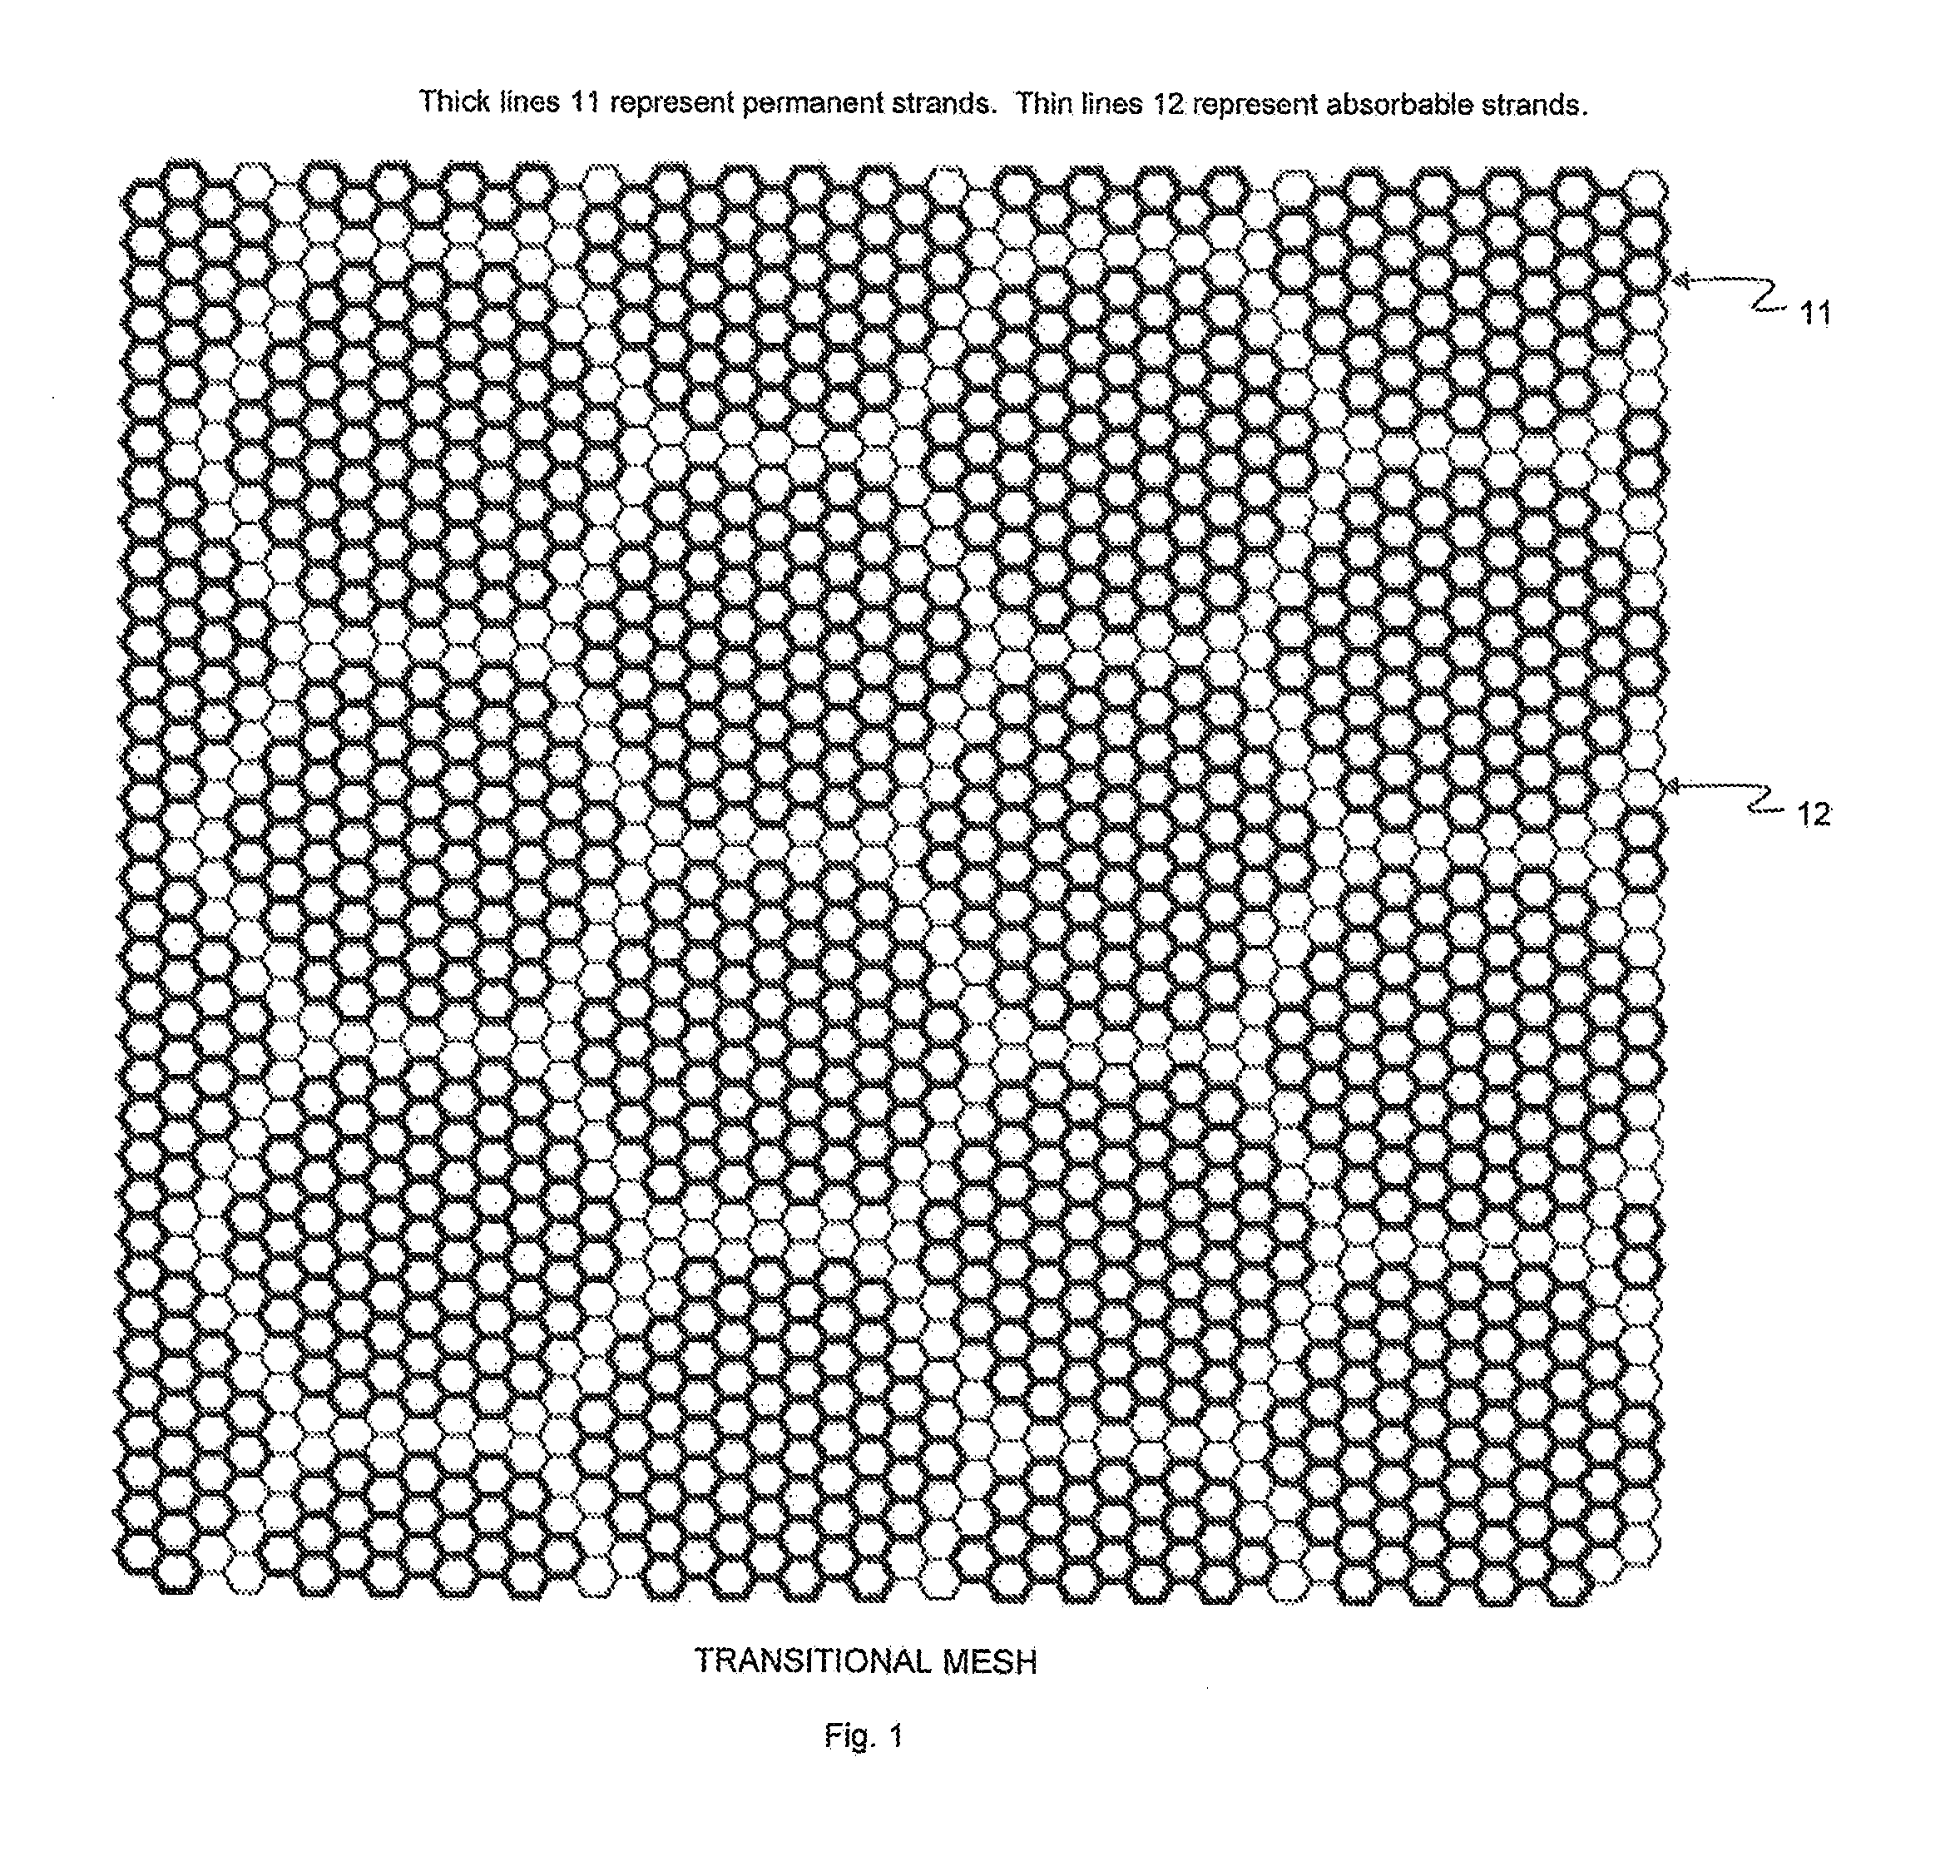 Supporting and Forming Transitional Material for Use in Supporting Prosthesis Devices, Implants and to Provide Structure in a Human Body